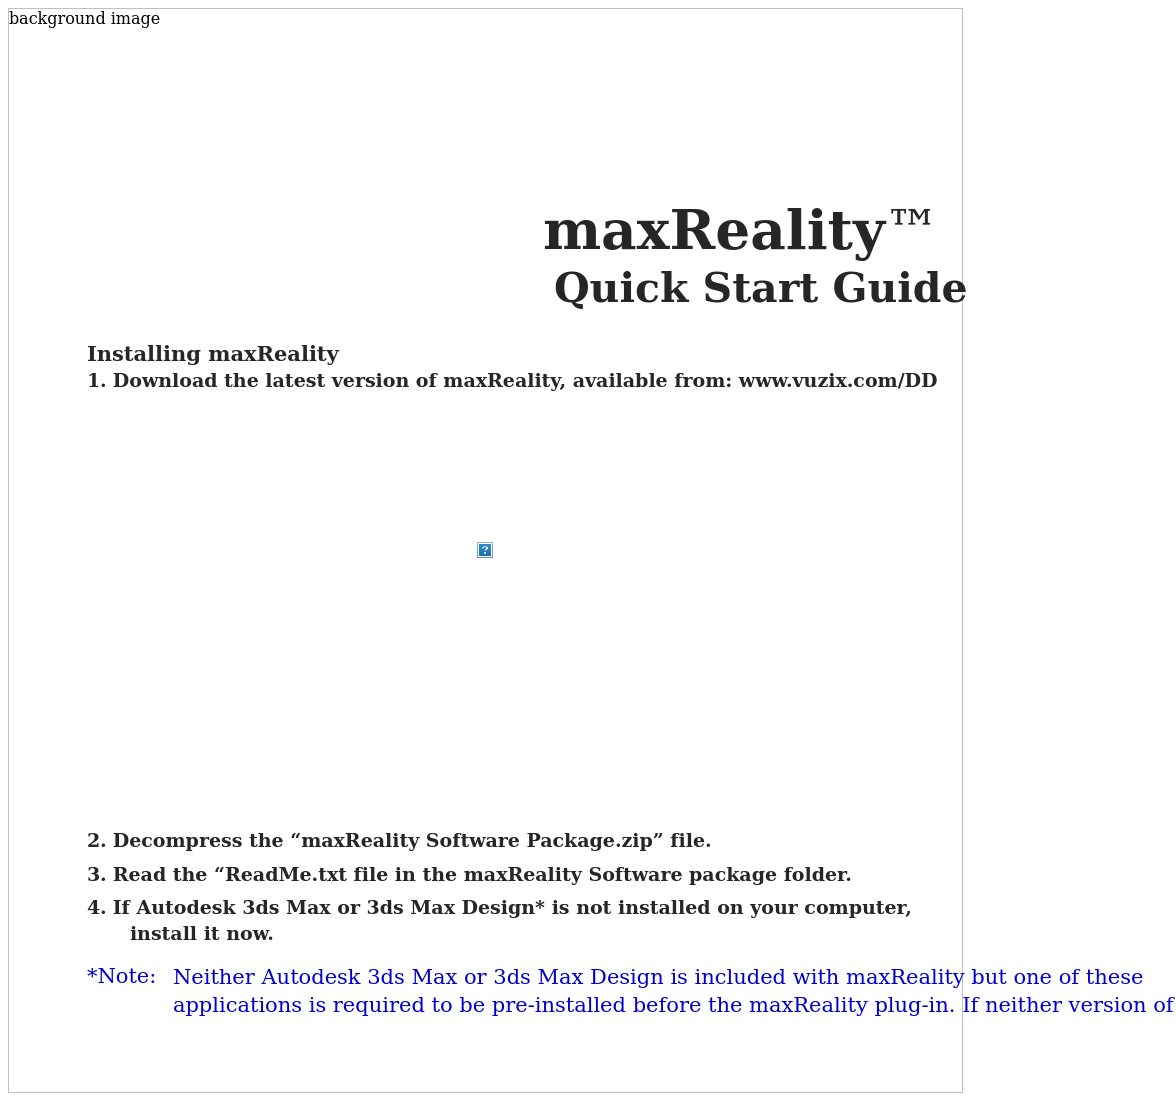 maxReality 6.1 Quick Start Guide